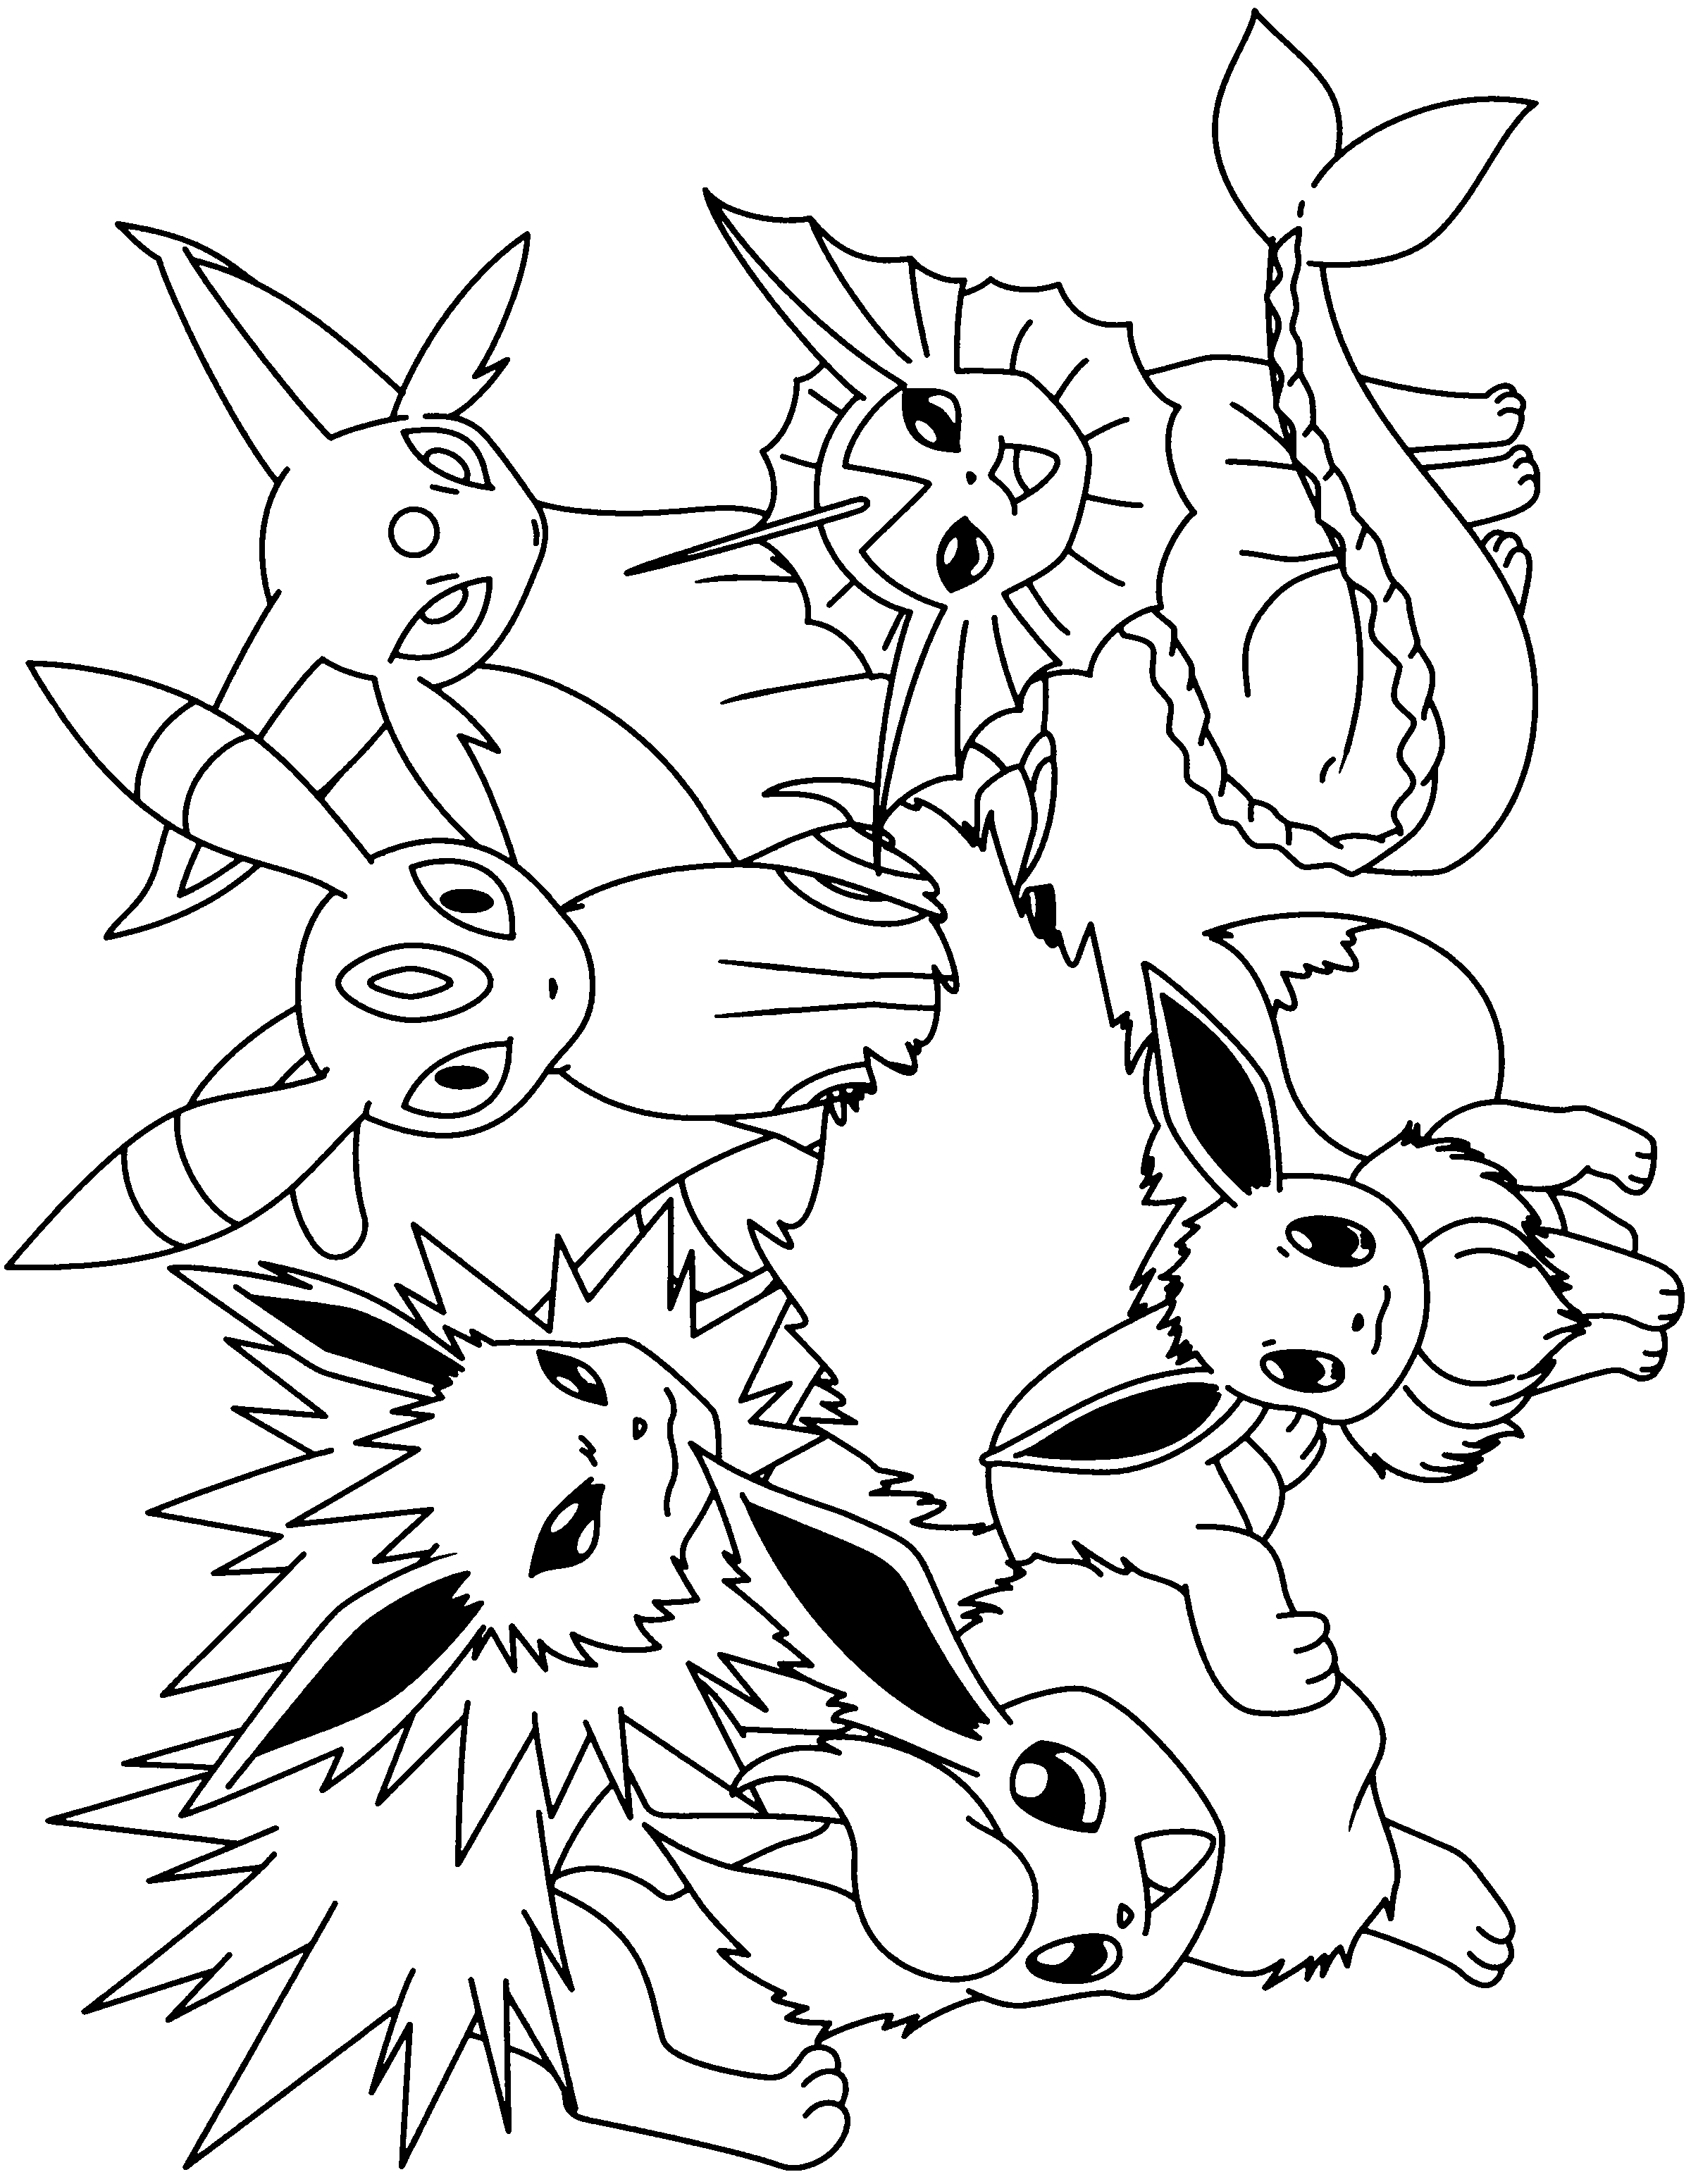 Pokemon Evolution Coloring Pages At GetColorings Free Printable Colorings Pages To Print